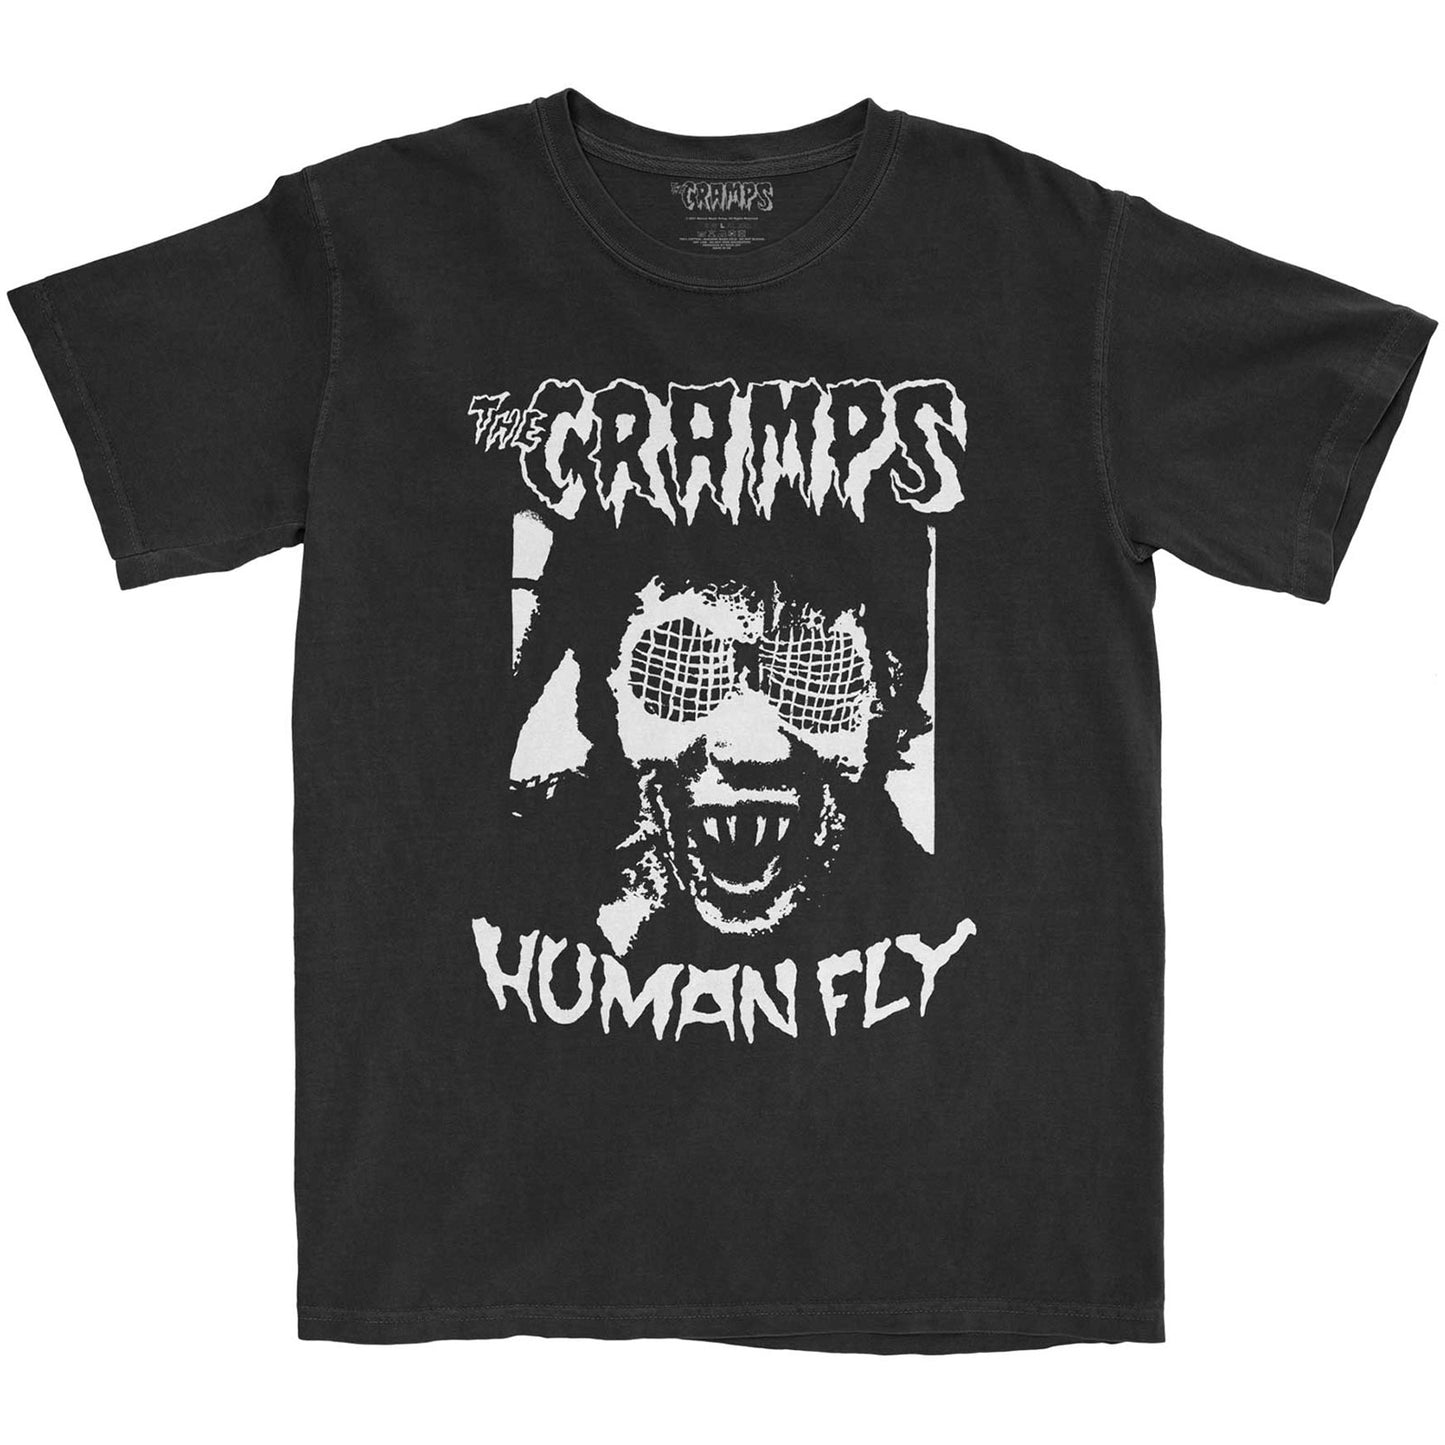 The Cramps T-Shirt: Human Fly